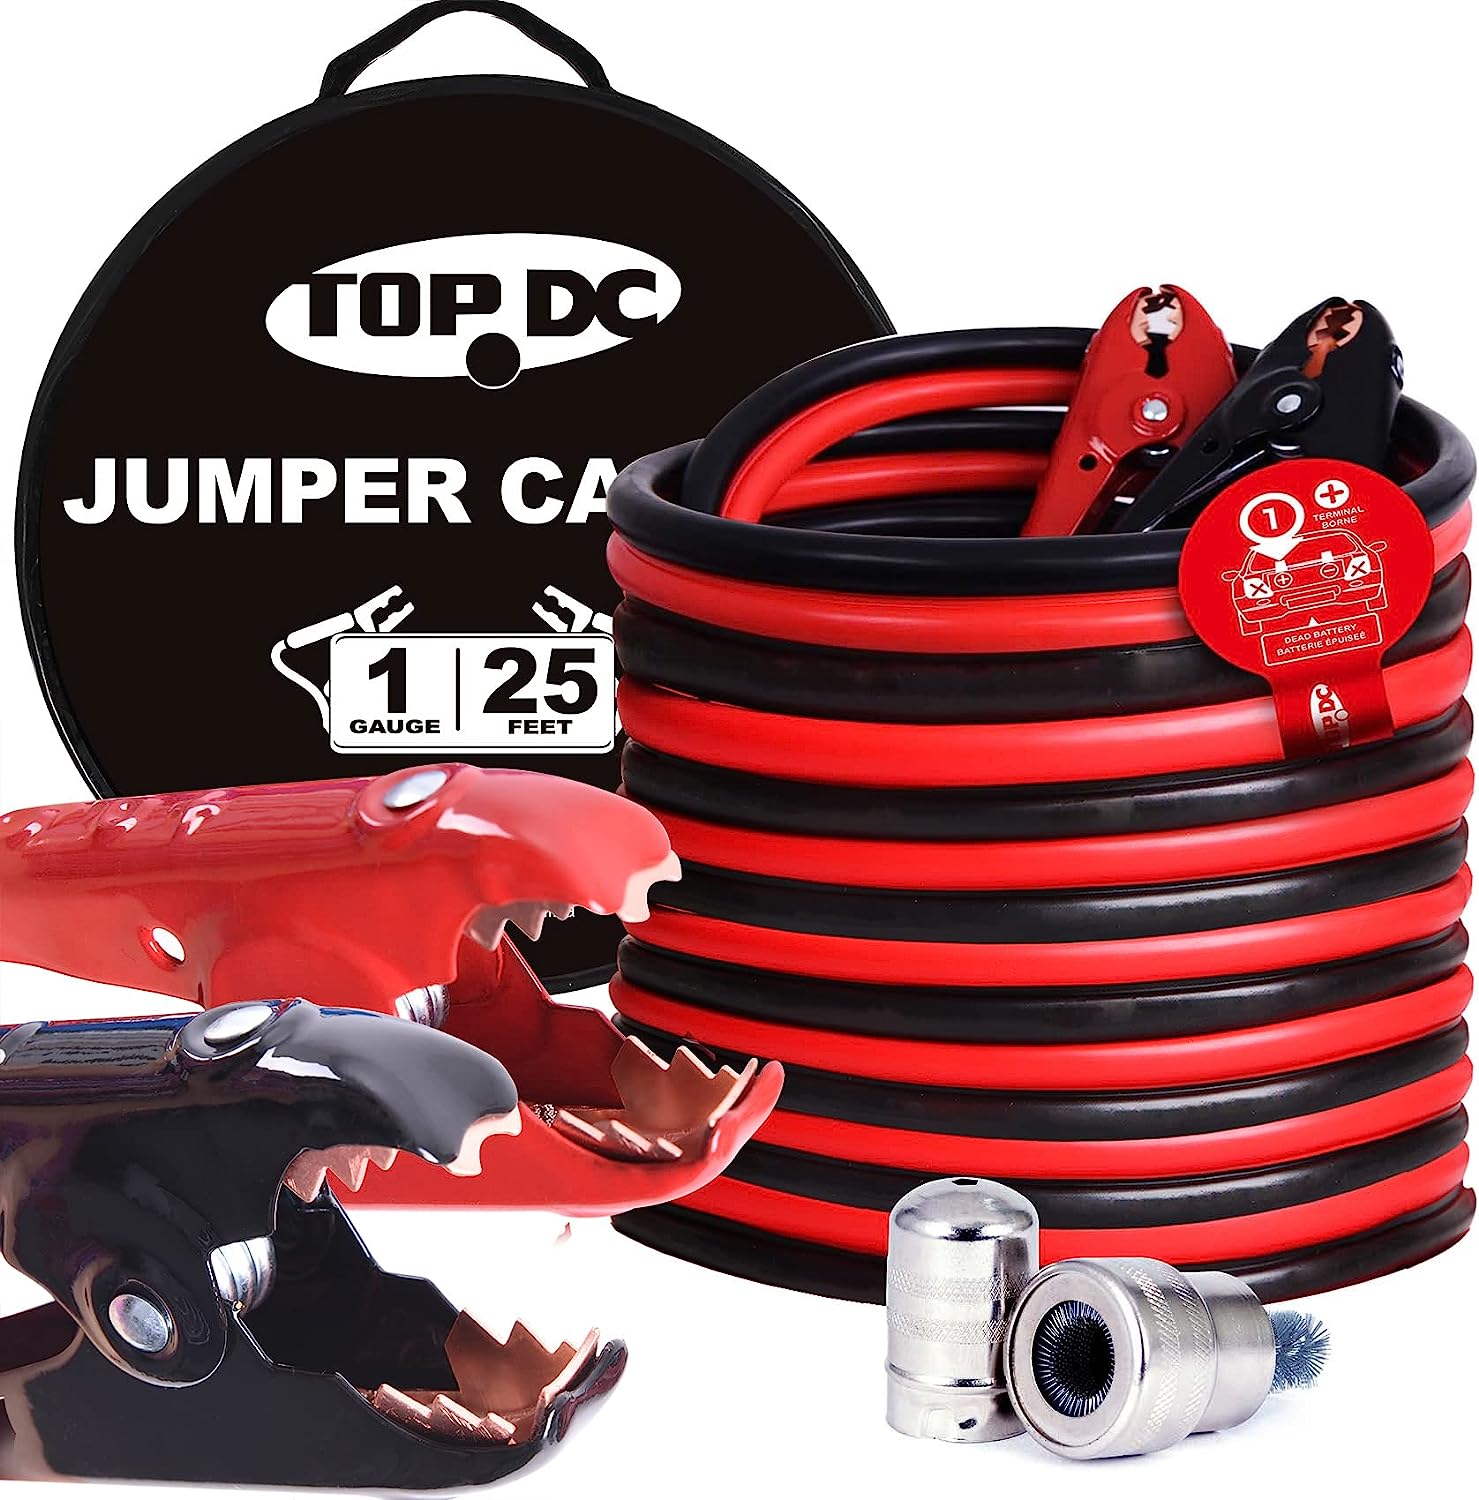 TOPDC 1 Gauge 25 Feet Jumper Cables with UL-Listed [...]